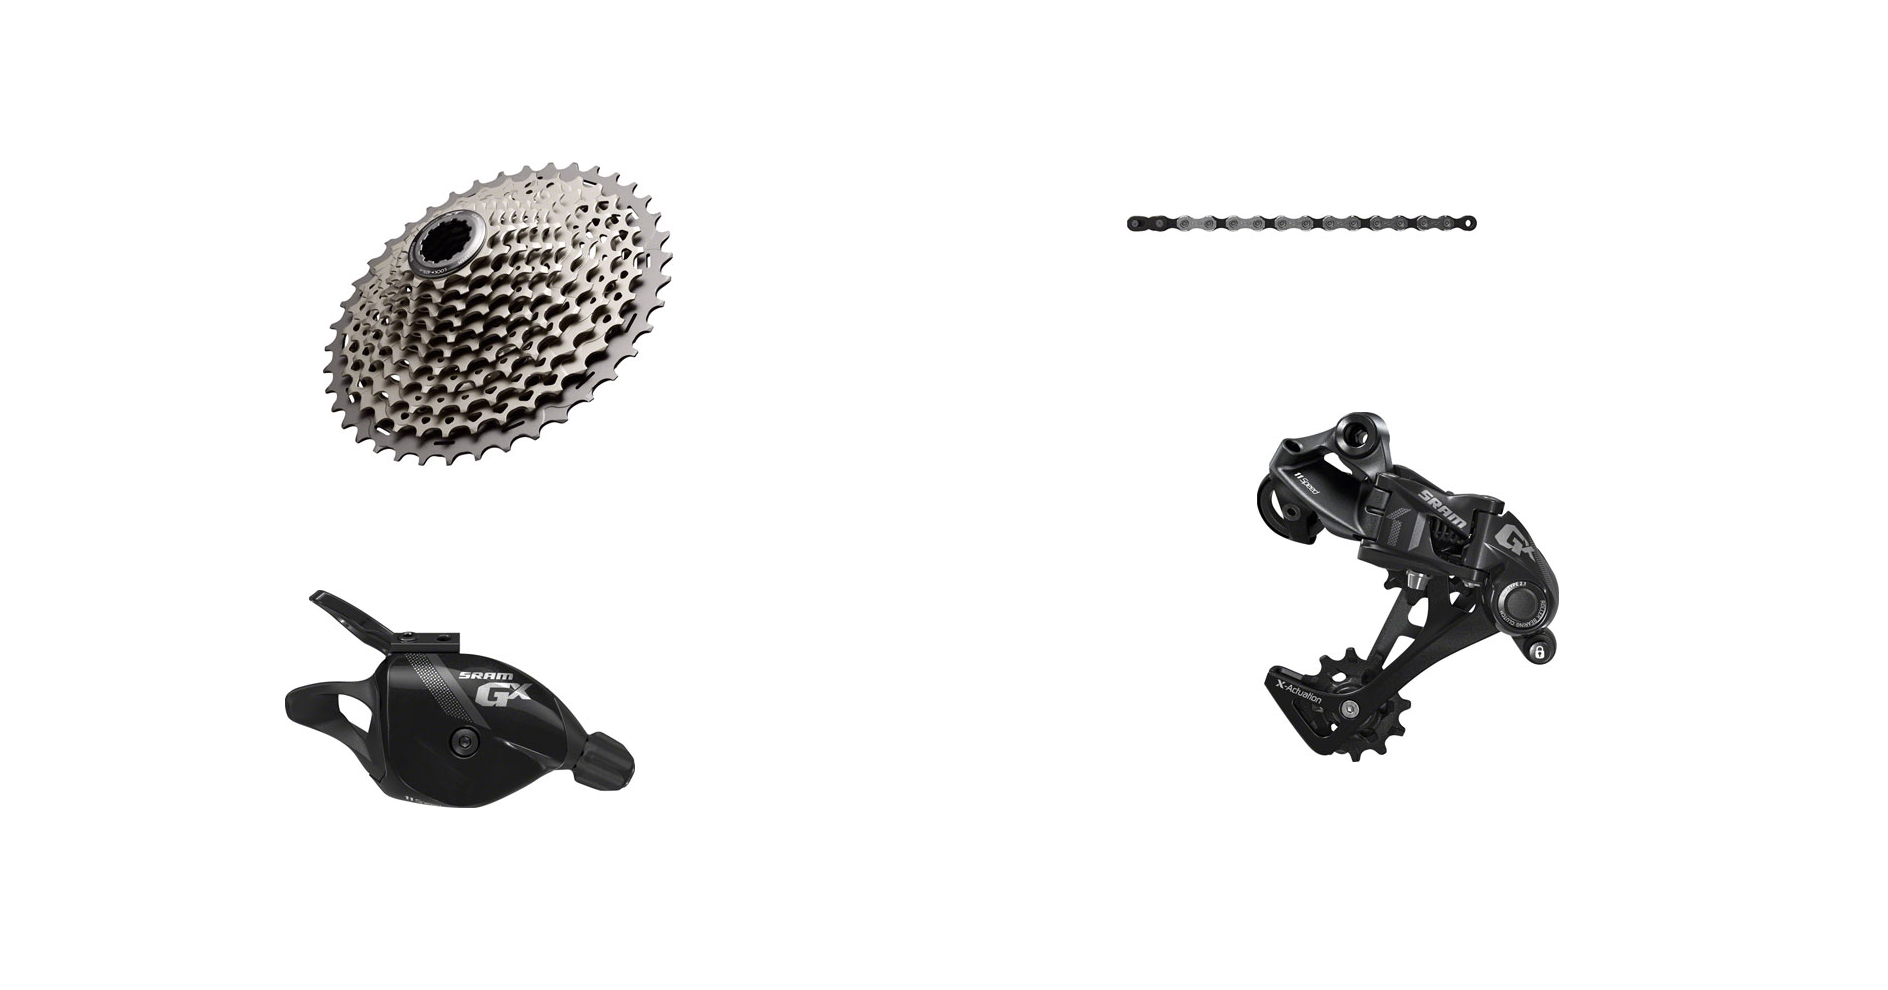 SRAM/Shimano 1x11 Group XT Cassette 11-42t, X1 Chain, GX Derailleur and Shifter MPN: FW0033-CH1052-RD6129-LD6131 Kit-In-A-Box Mtn Group XT Groupset